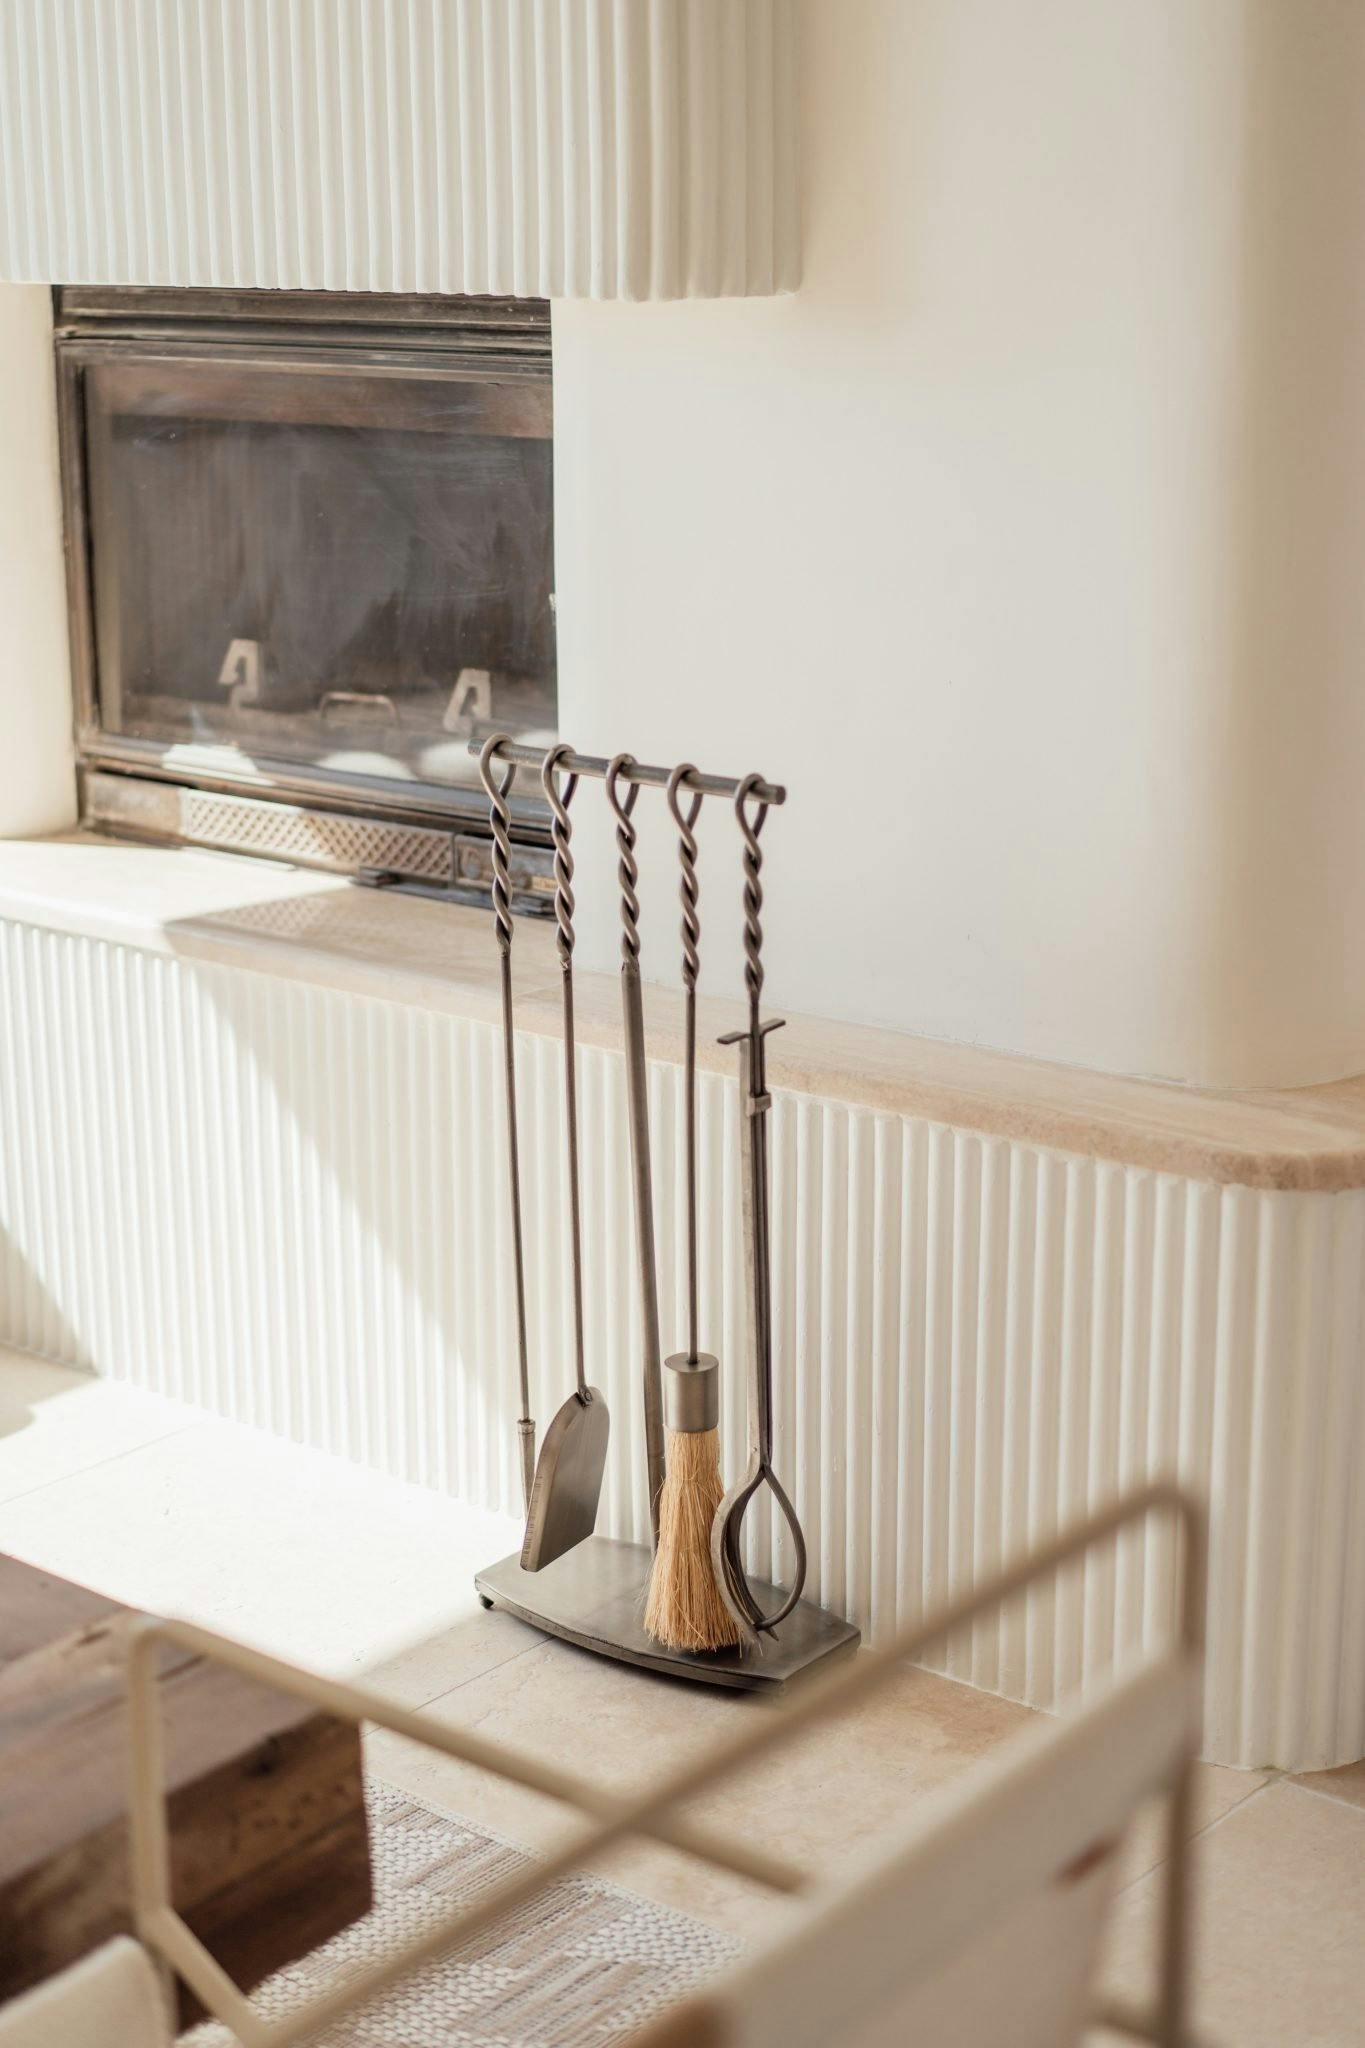 Fireplace tools, with the castrée fireplace in the background